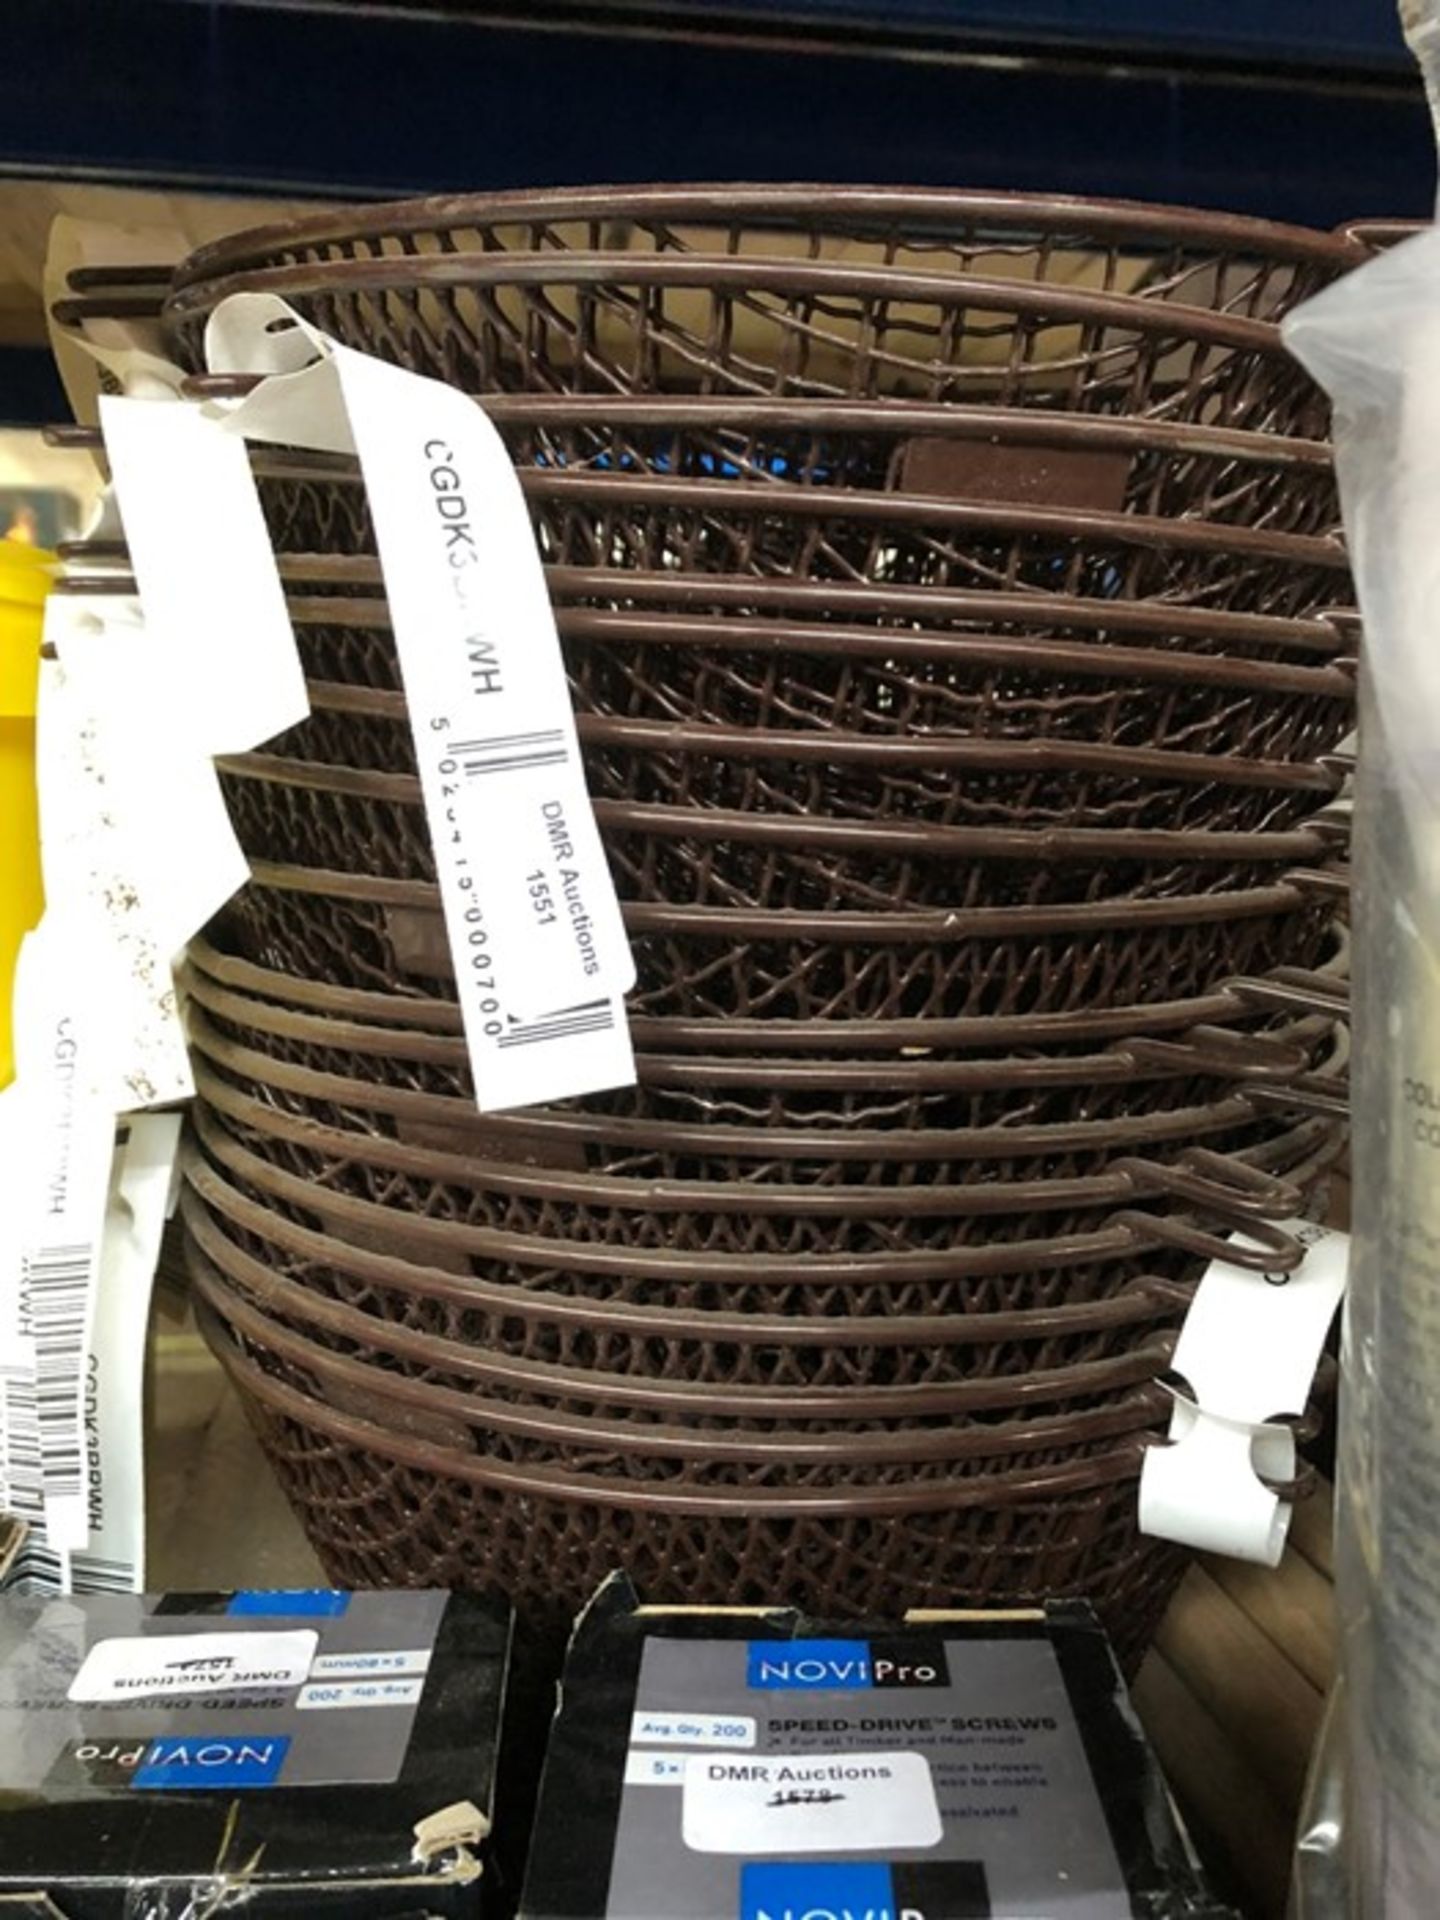 1 LOT TO CONTAIN APPROX 18 TOWER FLUE TERMINAL CIRCULAR BOILER SAFETY GUARDS IN BROWN / PN - 785 (